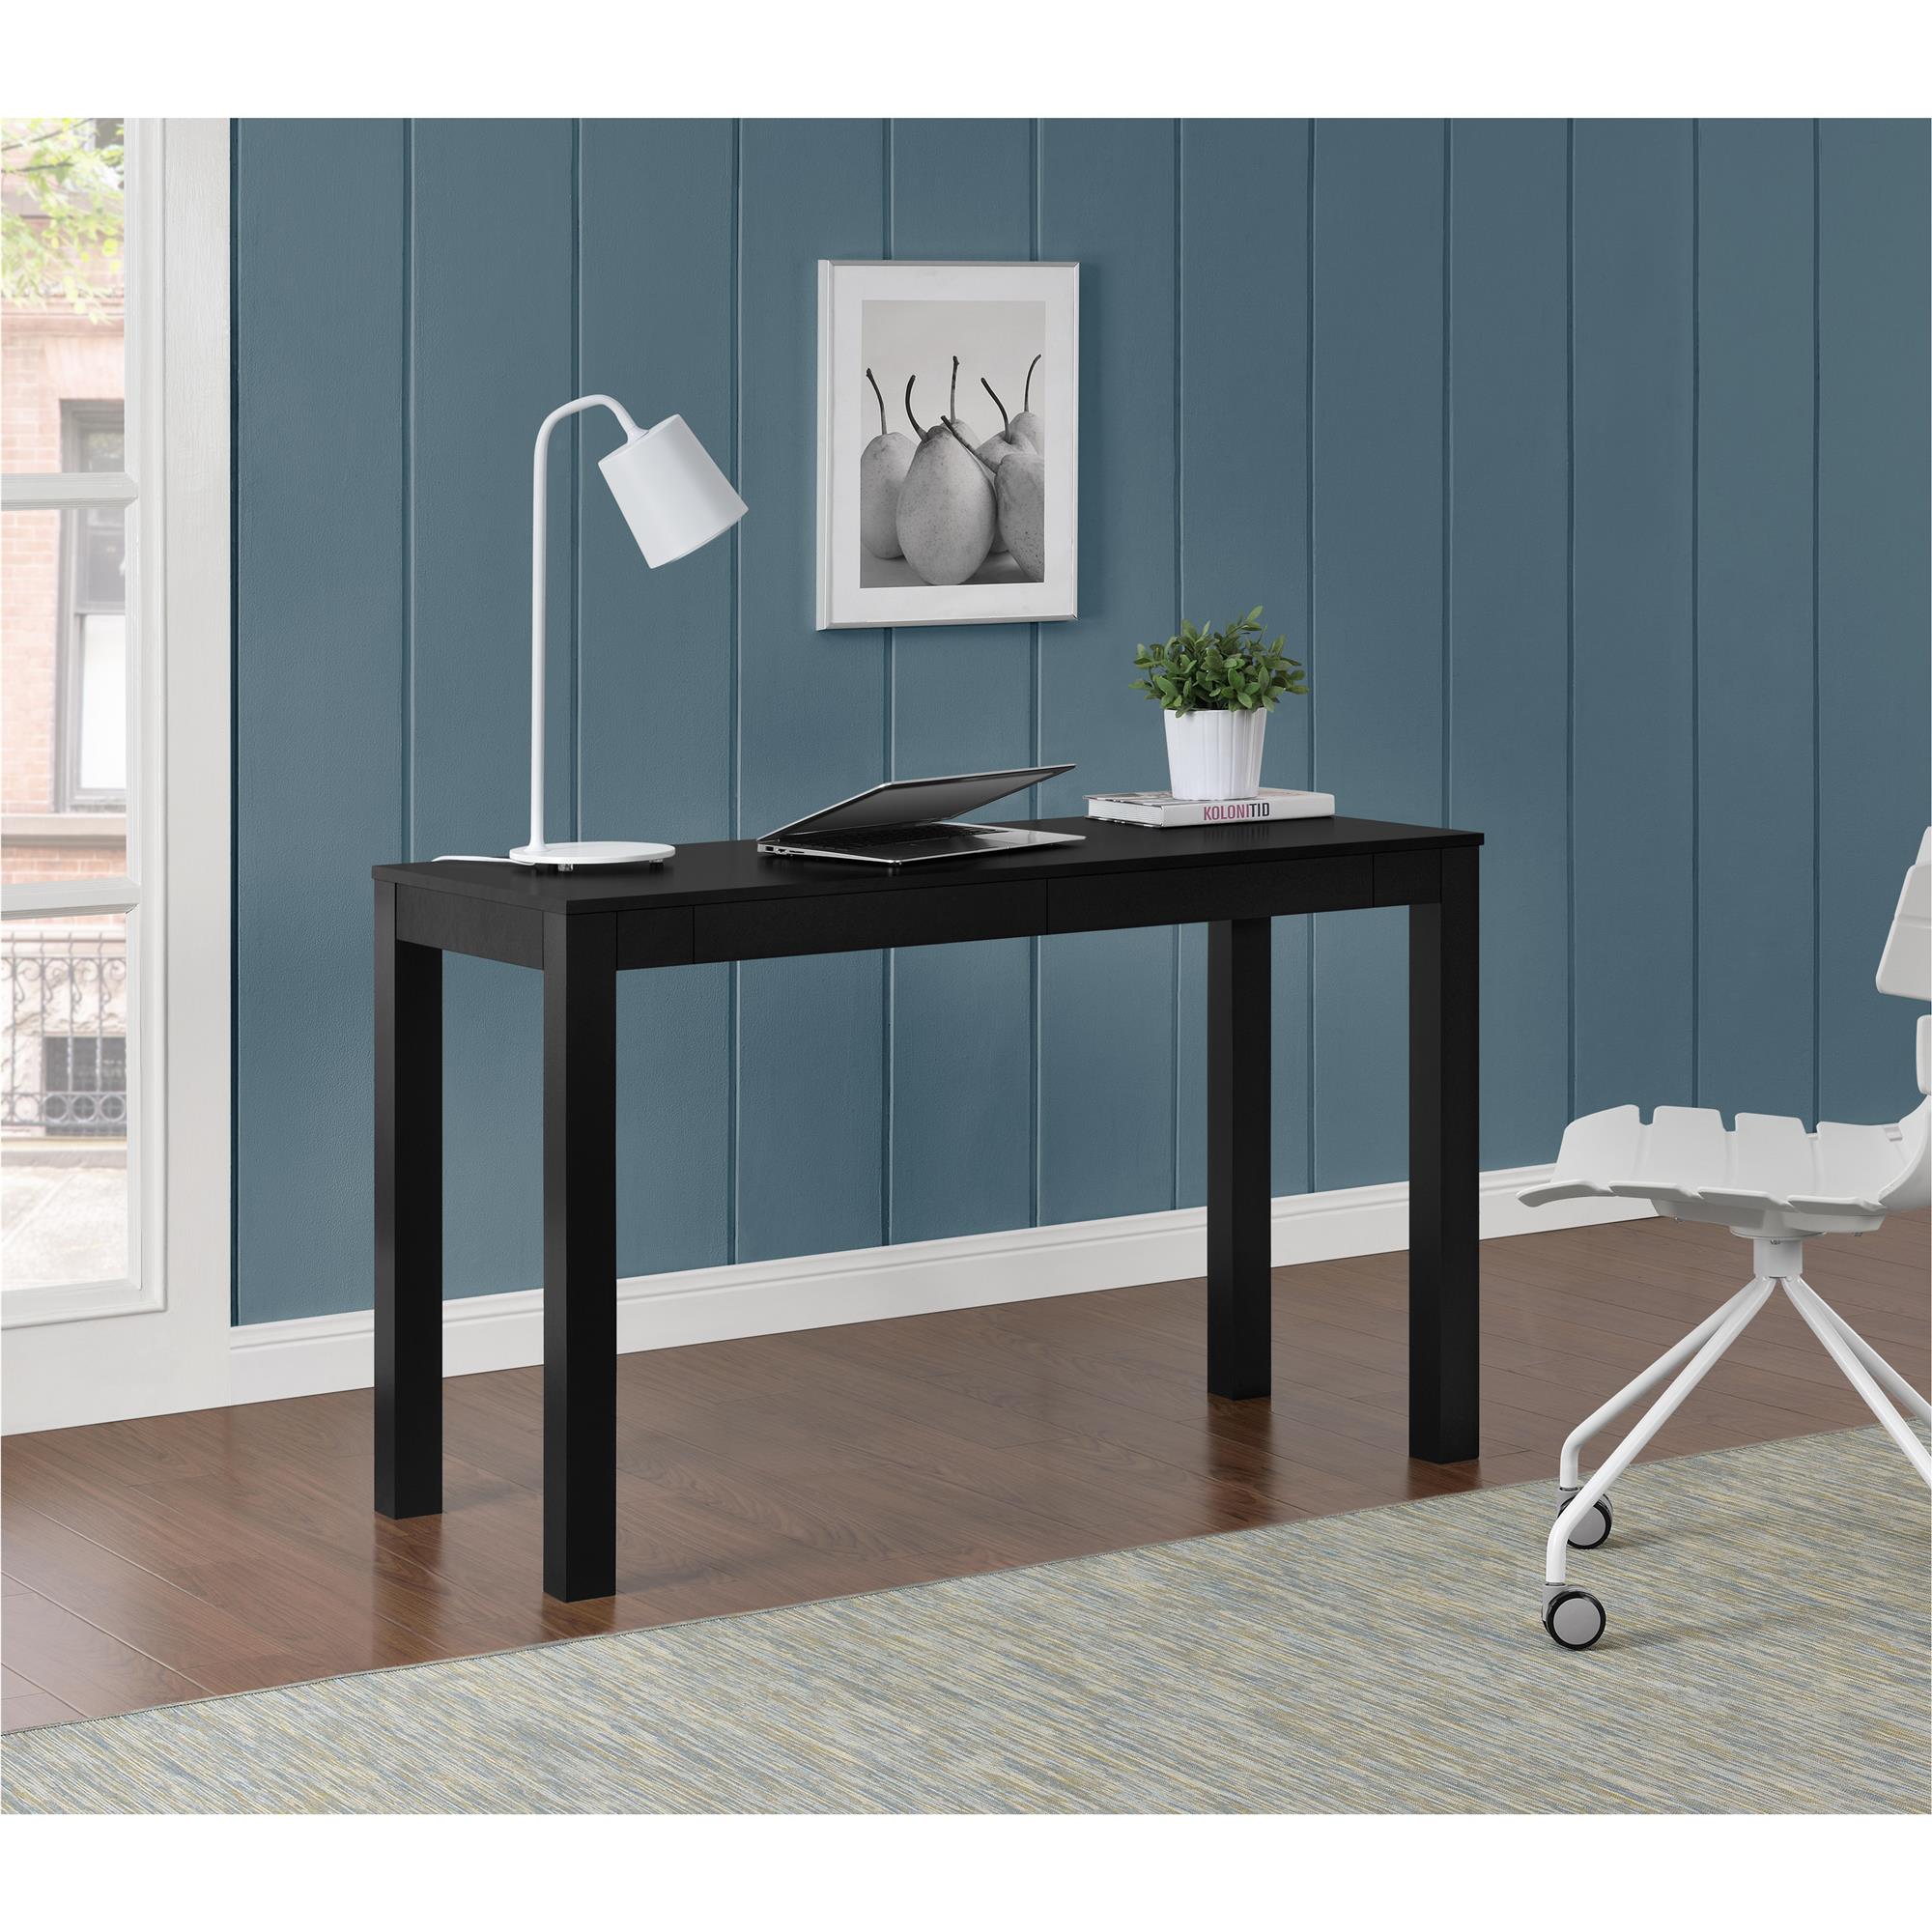 Ameriwood Home Large Parsons Computer Desk with 2 Drawers, Black - image 1 of 8